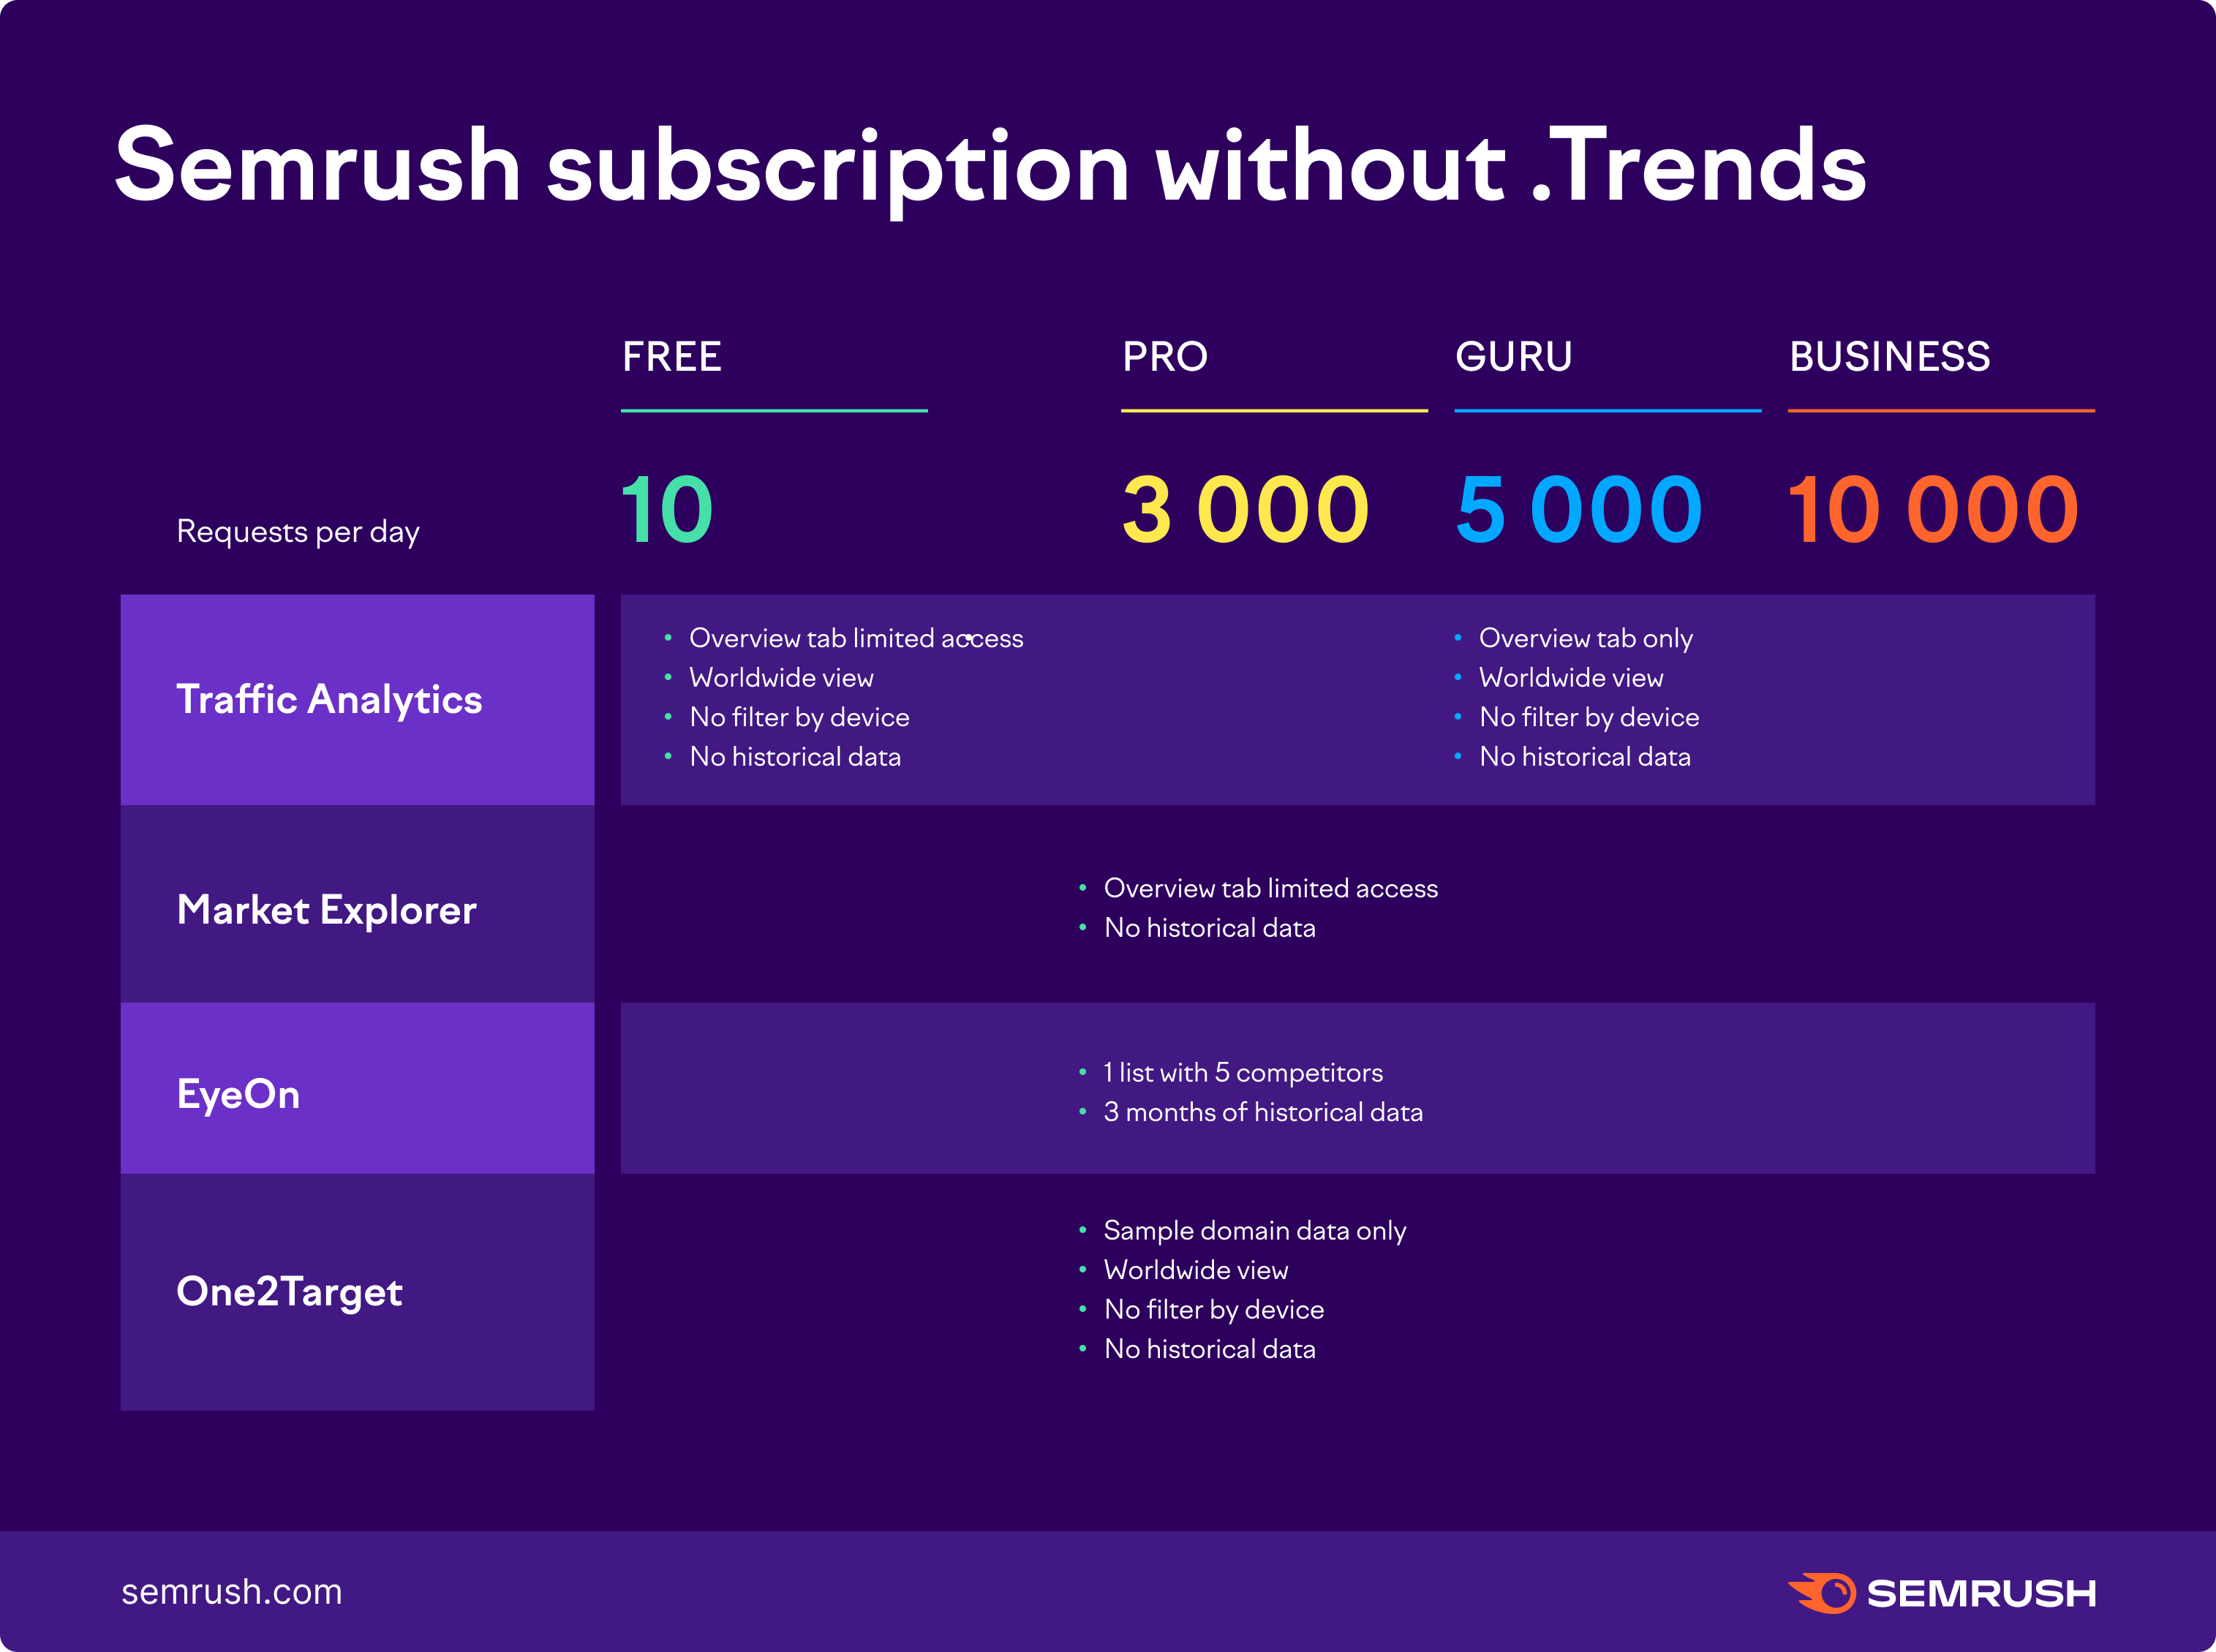 Semrush subscription without .Trends requests per day. Free plans: 10 requests per day. Pro plans: 3000 requests per day. Guru plans: 5000 requests per day. Business plans: 10000 requests per day. 